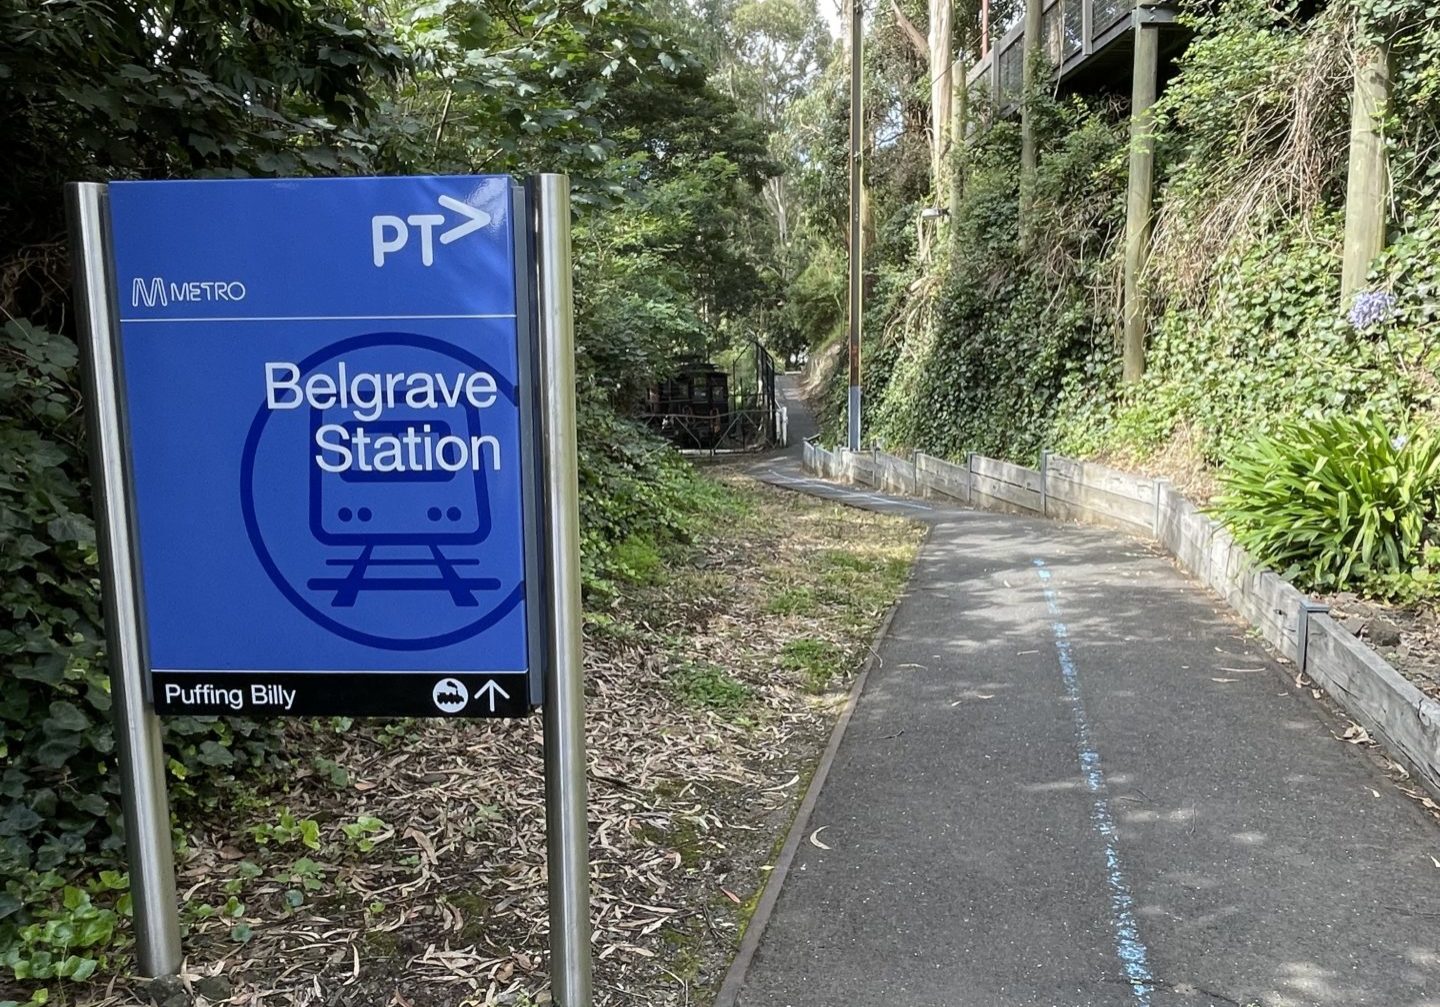 Pathway From Belgrave Metro Train Station To Puffing Billy Railway. The path has a bitumen surface and is quite narrow. It shows a blue line directing visitors to Puffing Billy from Metro.